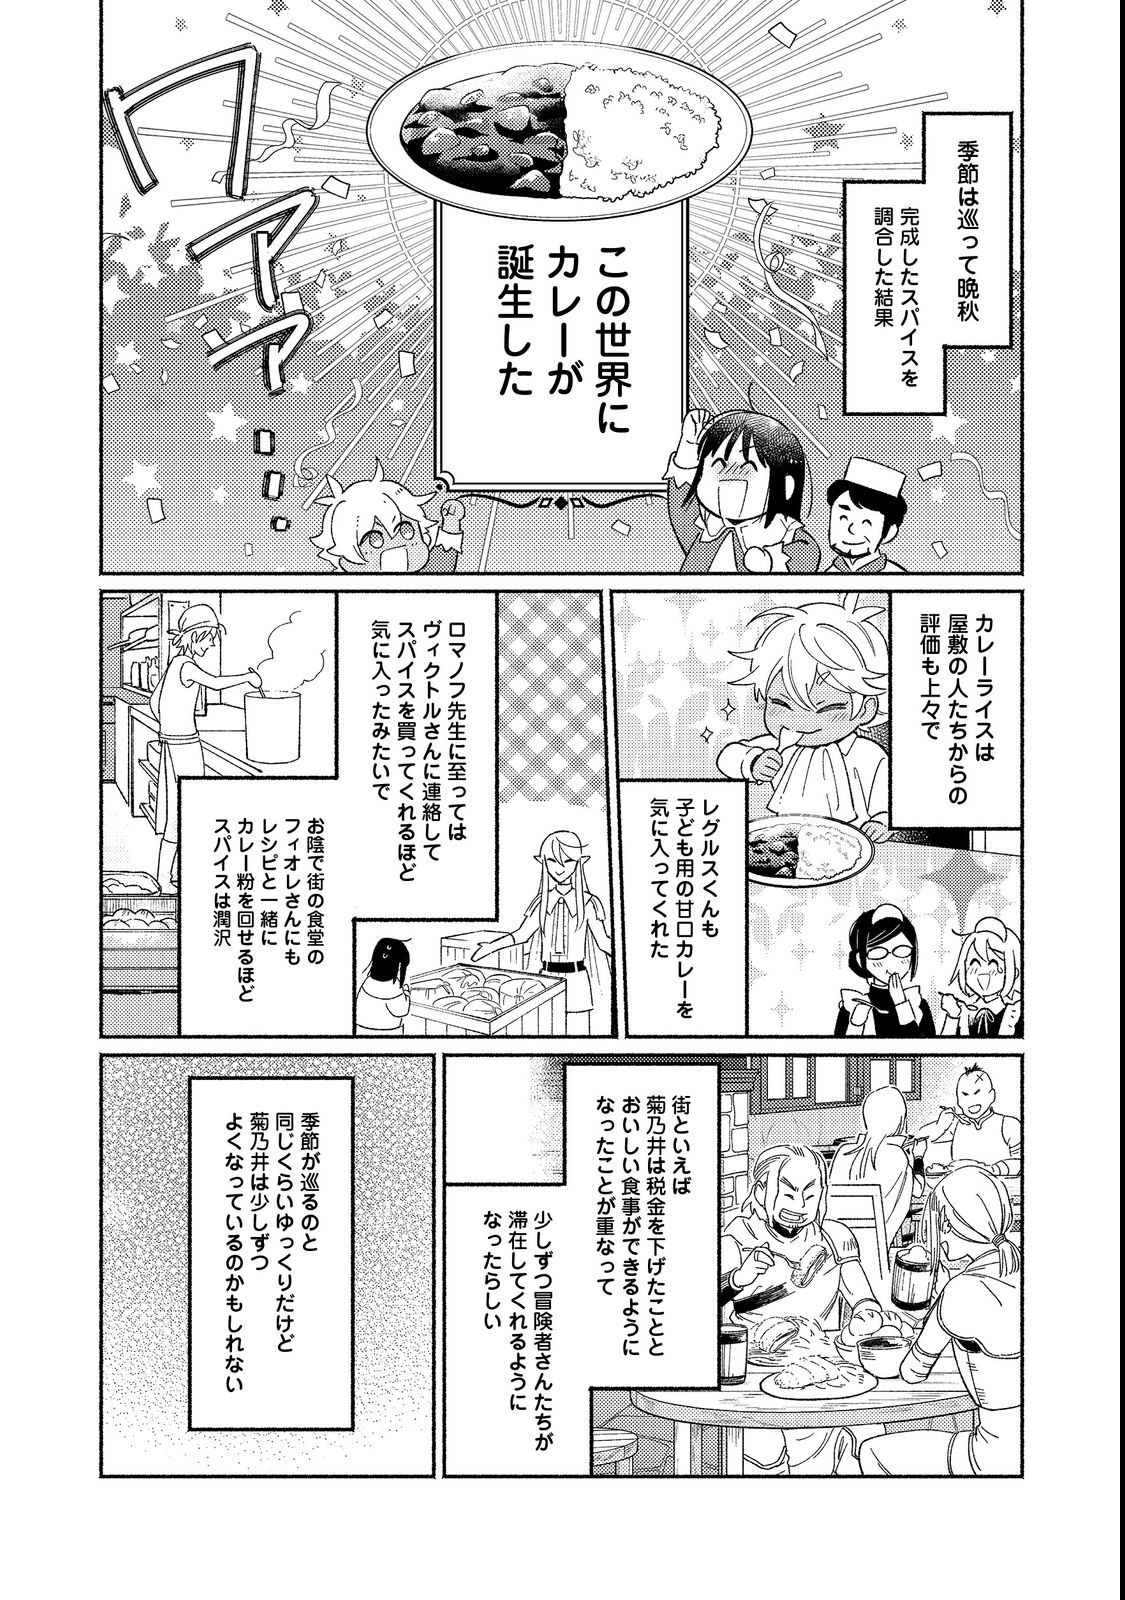 I’m the White Pig Nobleman 第17.1話 - Page 2